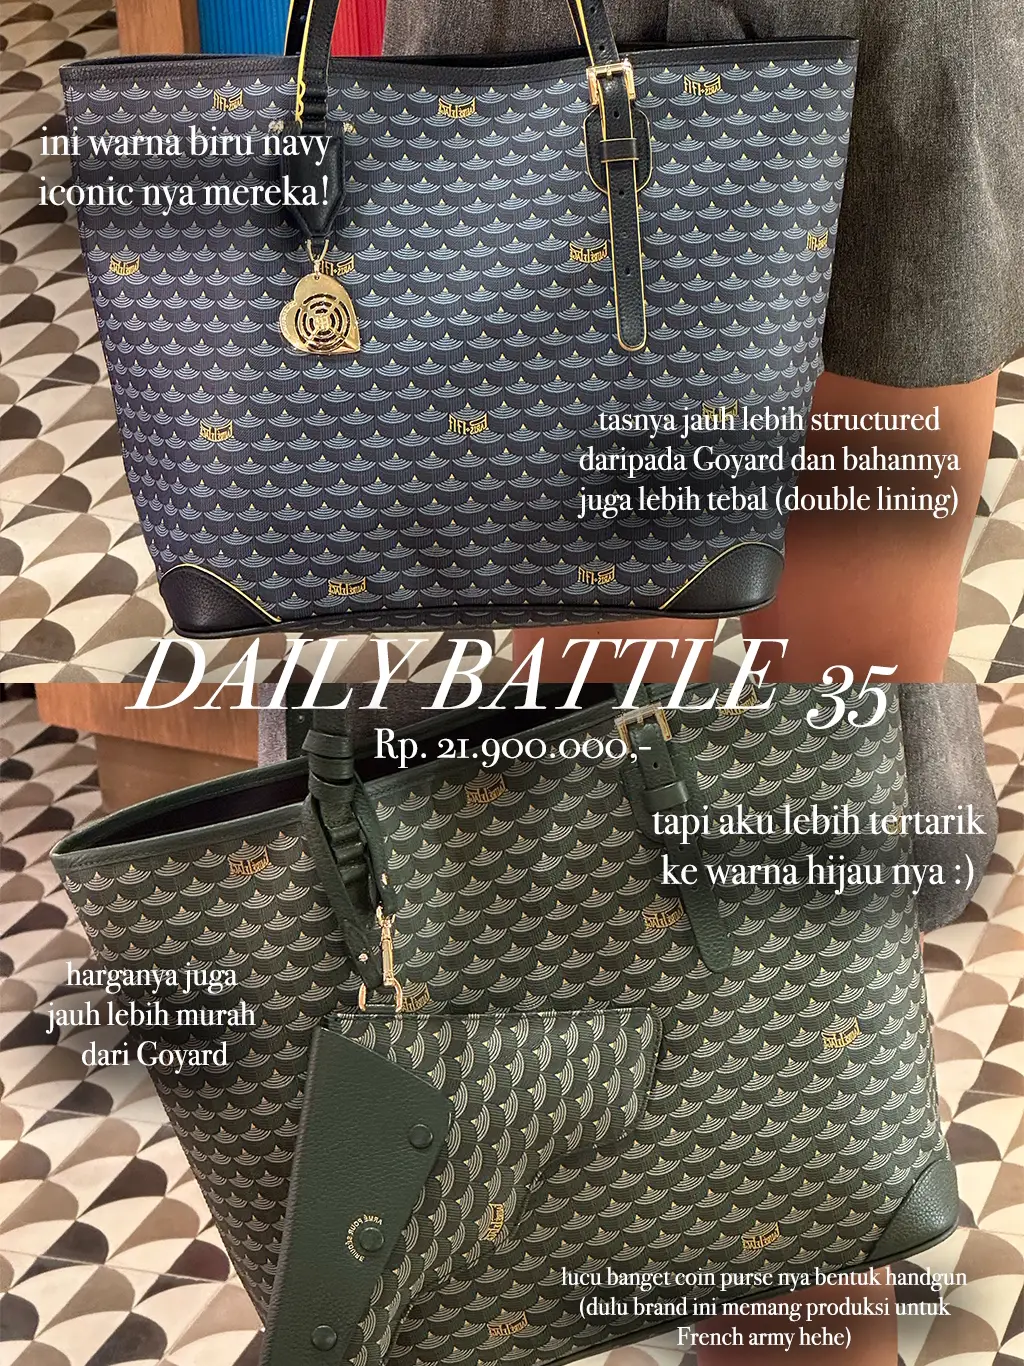 Faure Le Page Daily Battle 27 Navy w Insert